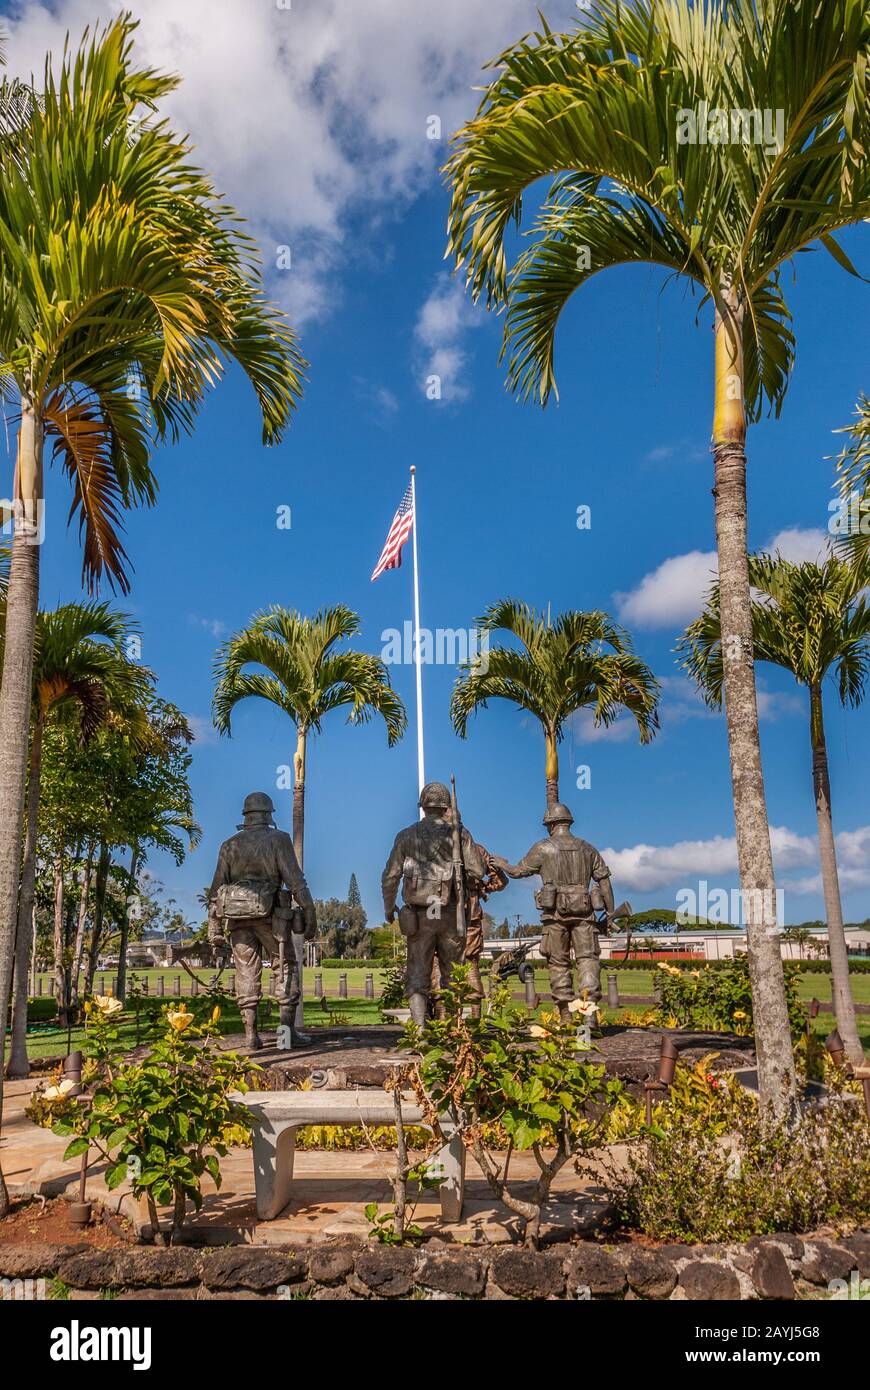 Oahu, Hawaii, USA. - January 10, 2012: United In Sacrifice group statue seen from back in front of US flag under blue skay at Schofield Barracks of Ar Stock Photo